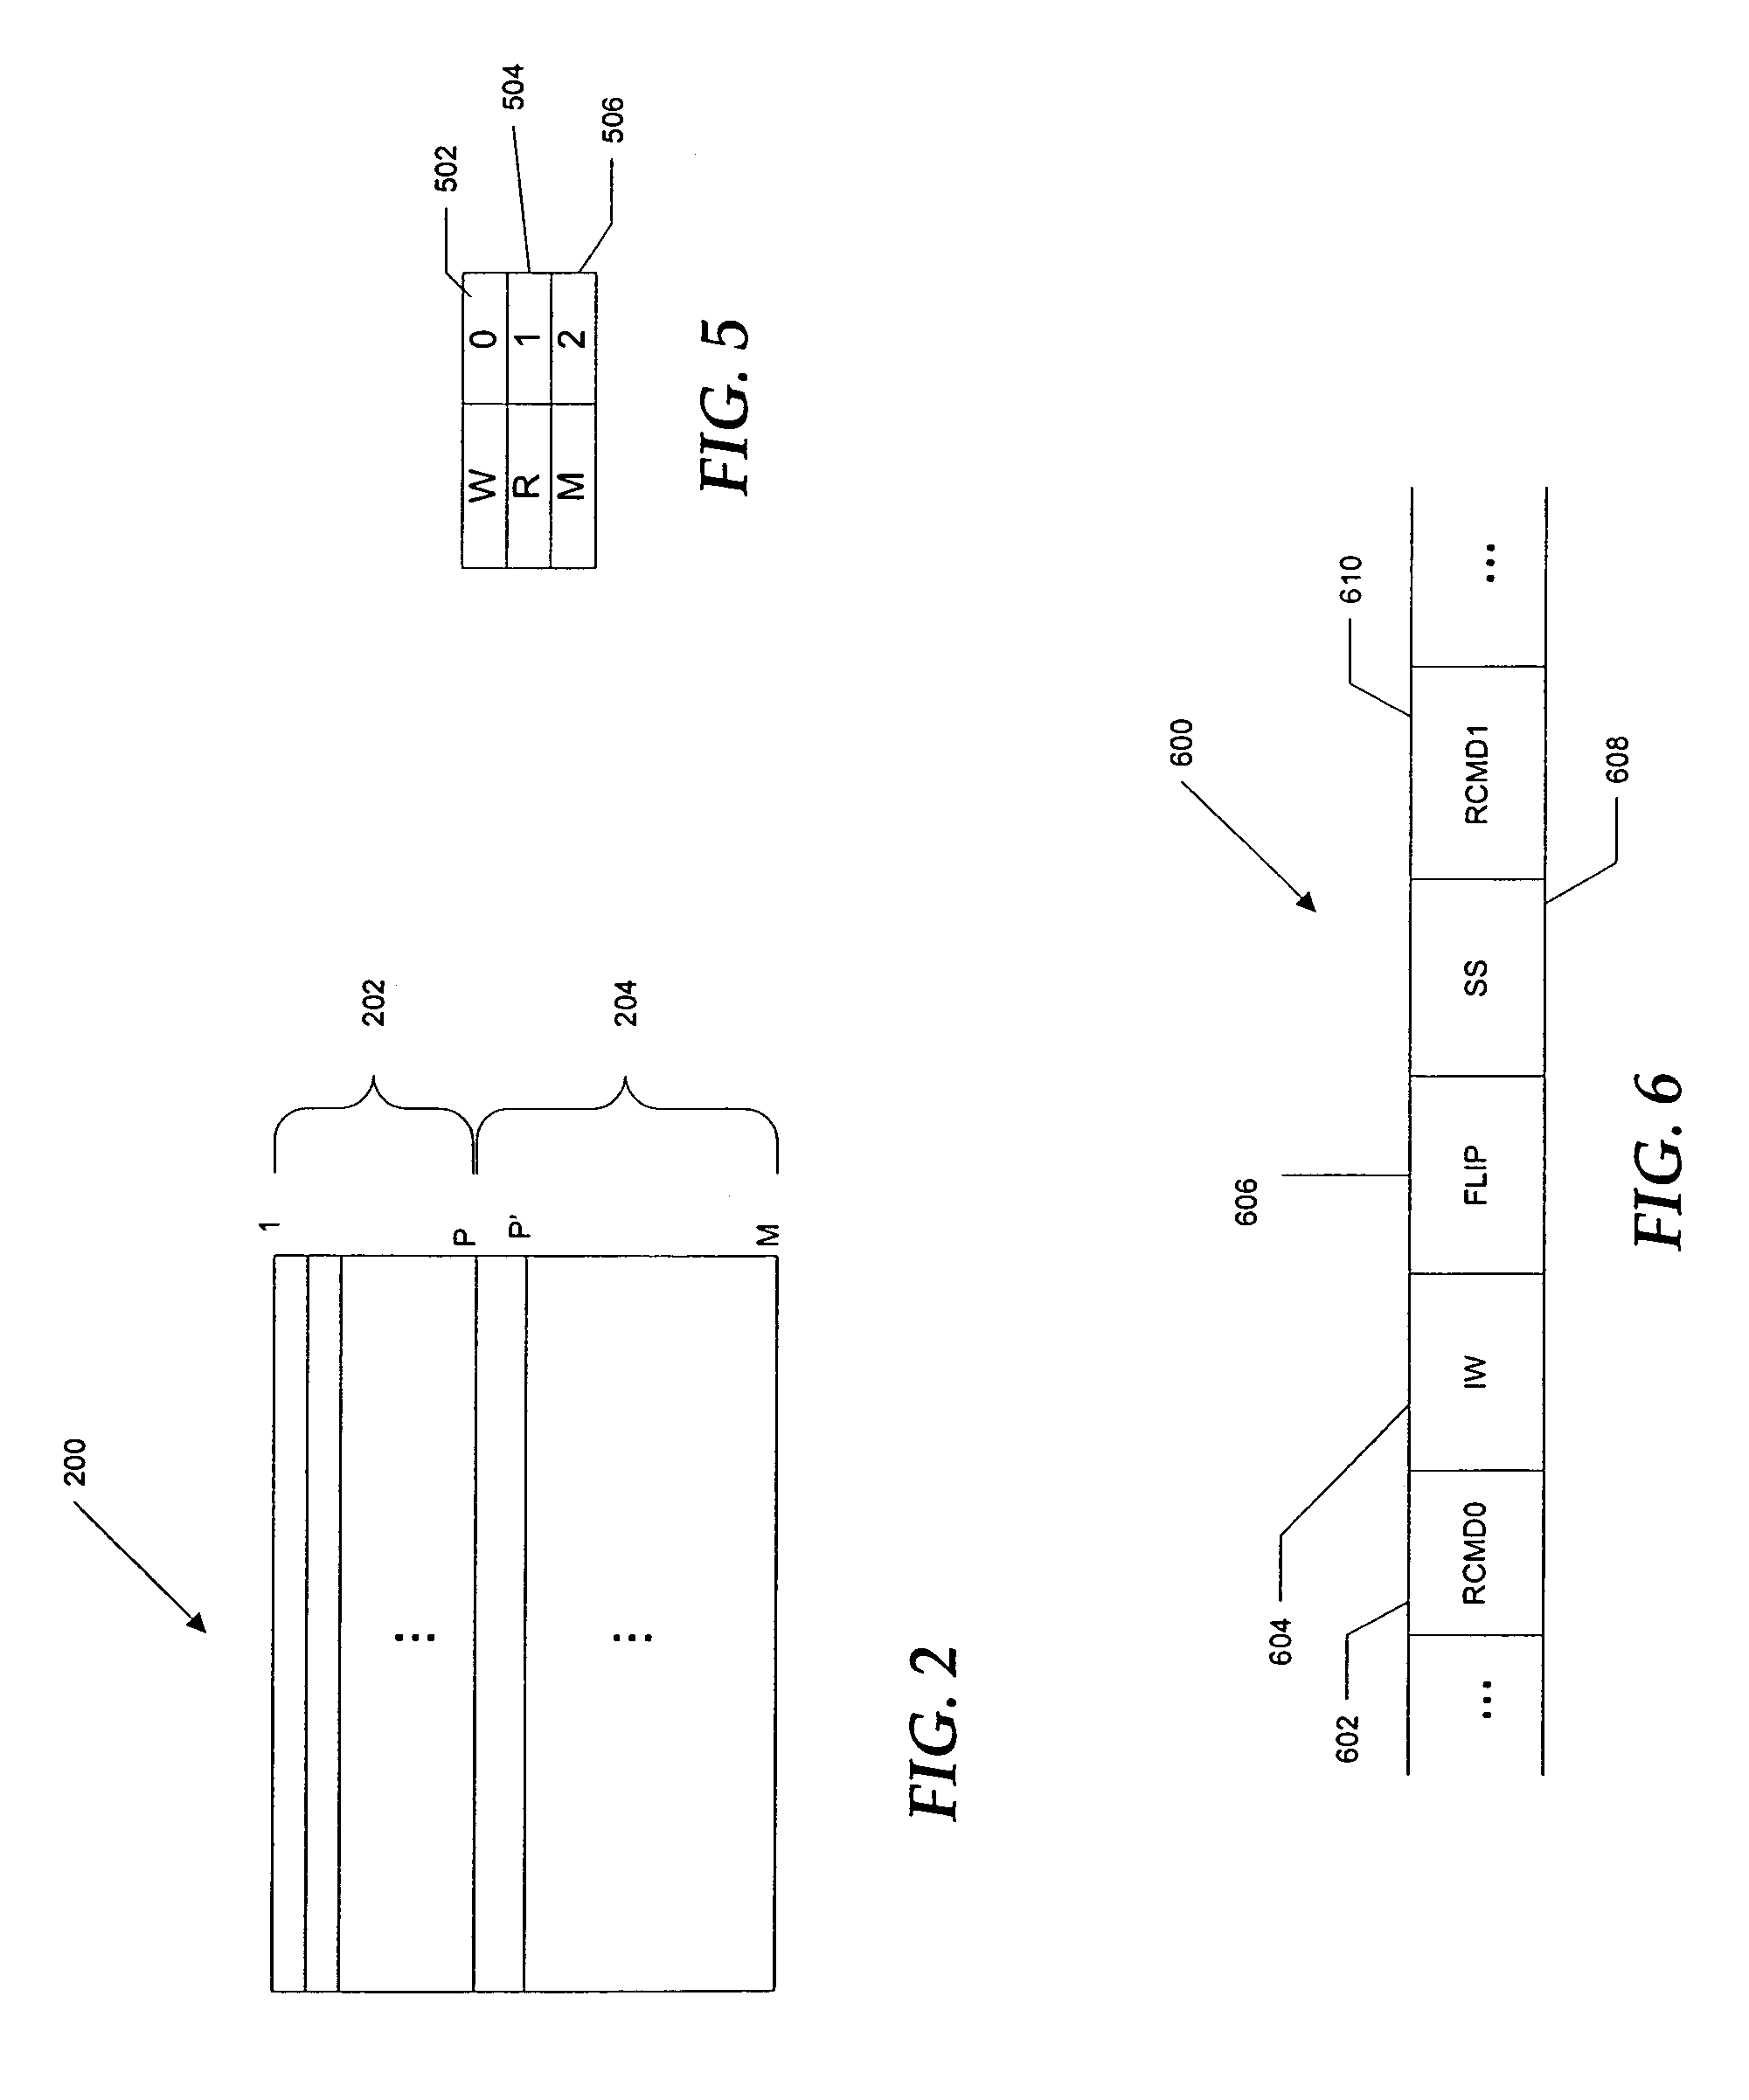 Coherence of displayed images for split-frame rendering in multi-processor graphics system